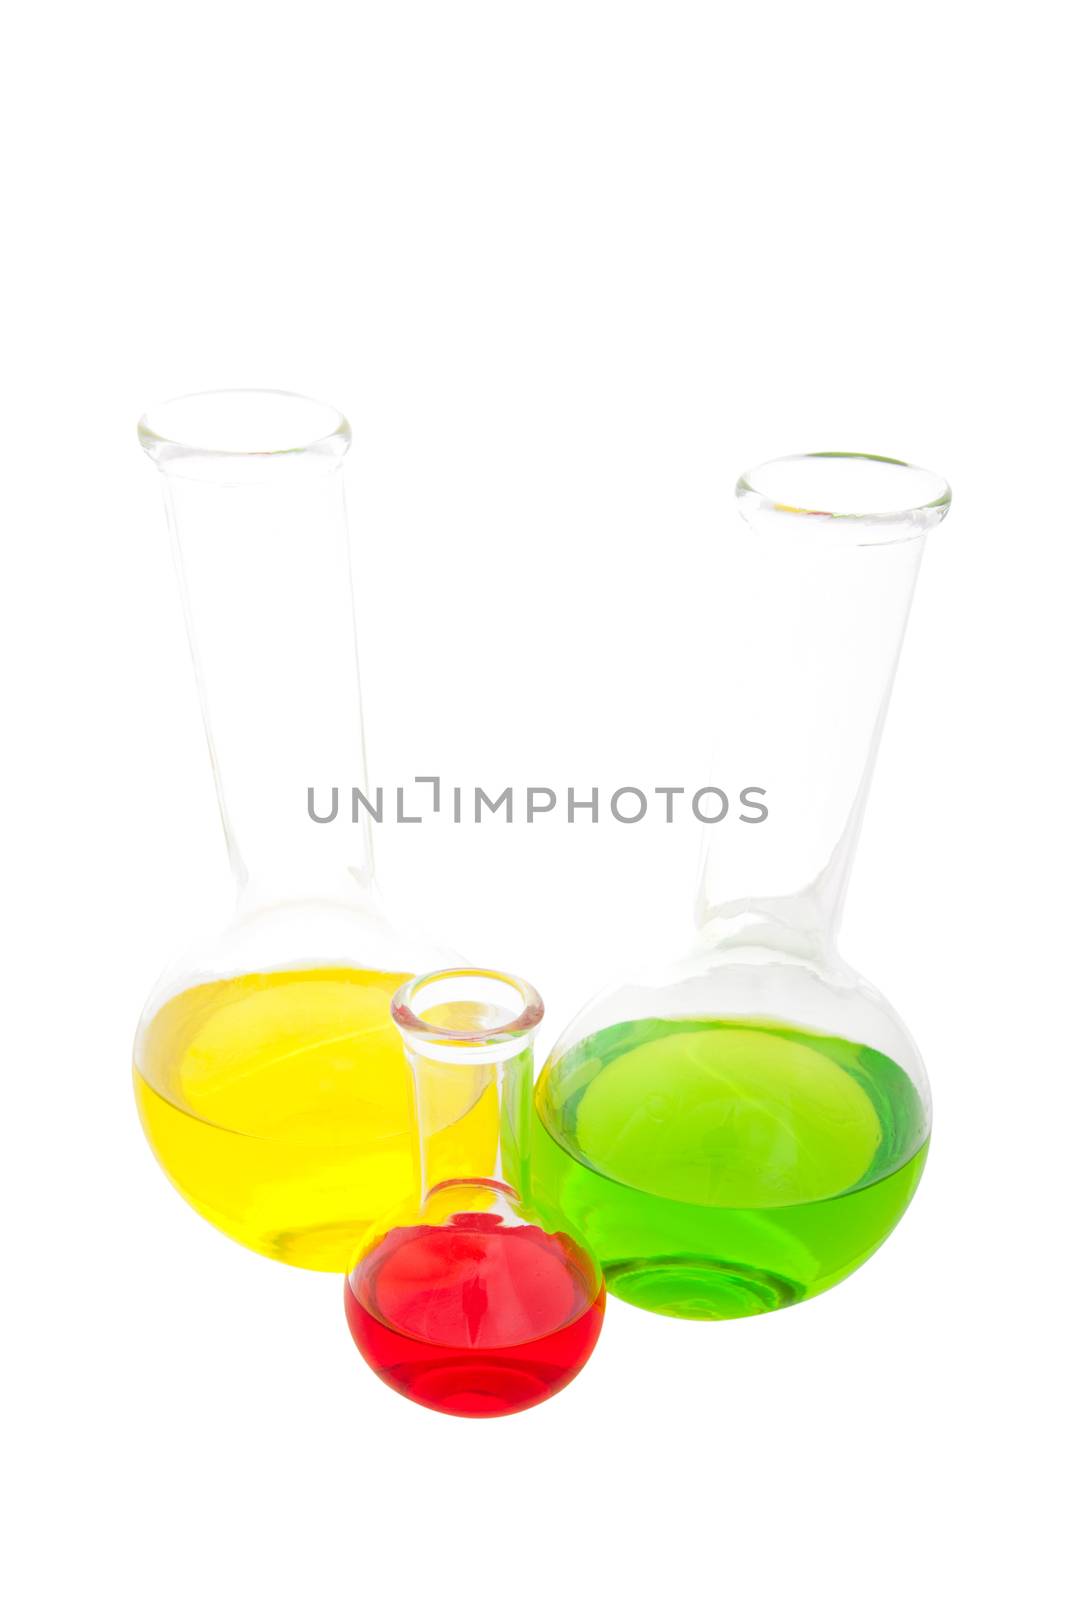 Laboratory glass containing various fluids from a wide angle perspective.  Shot on white background.